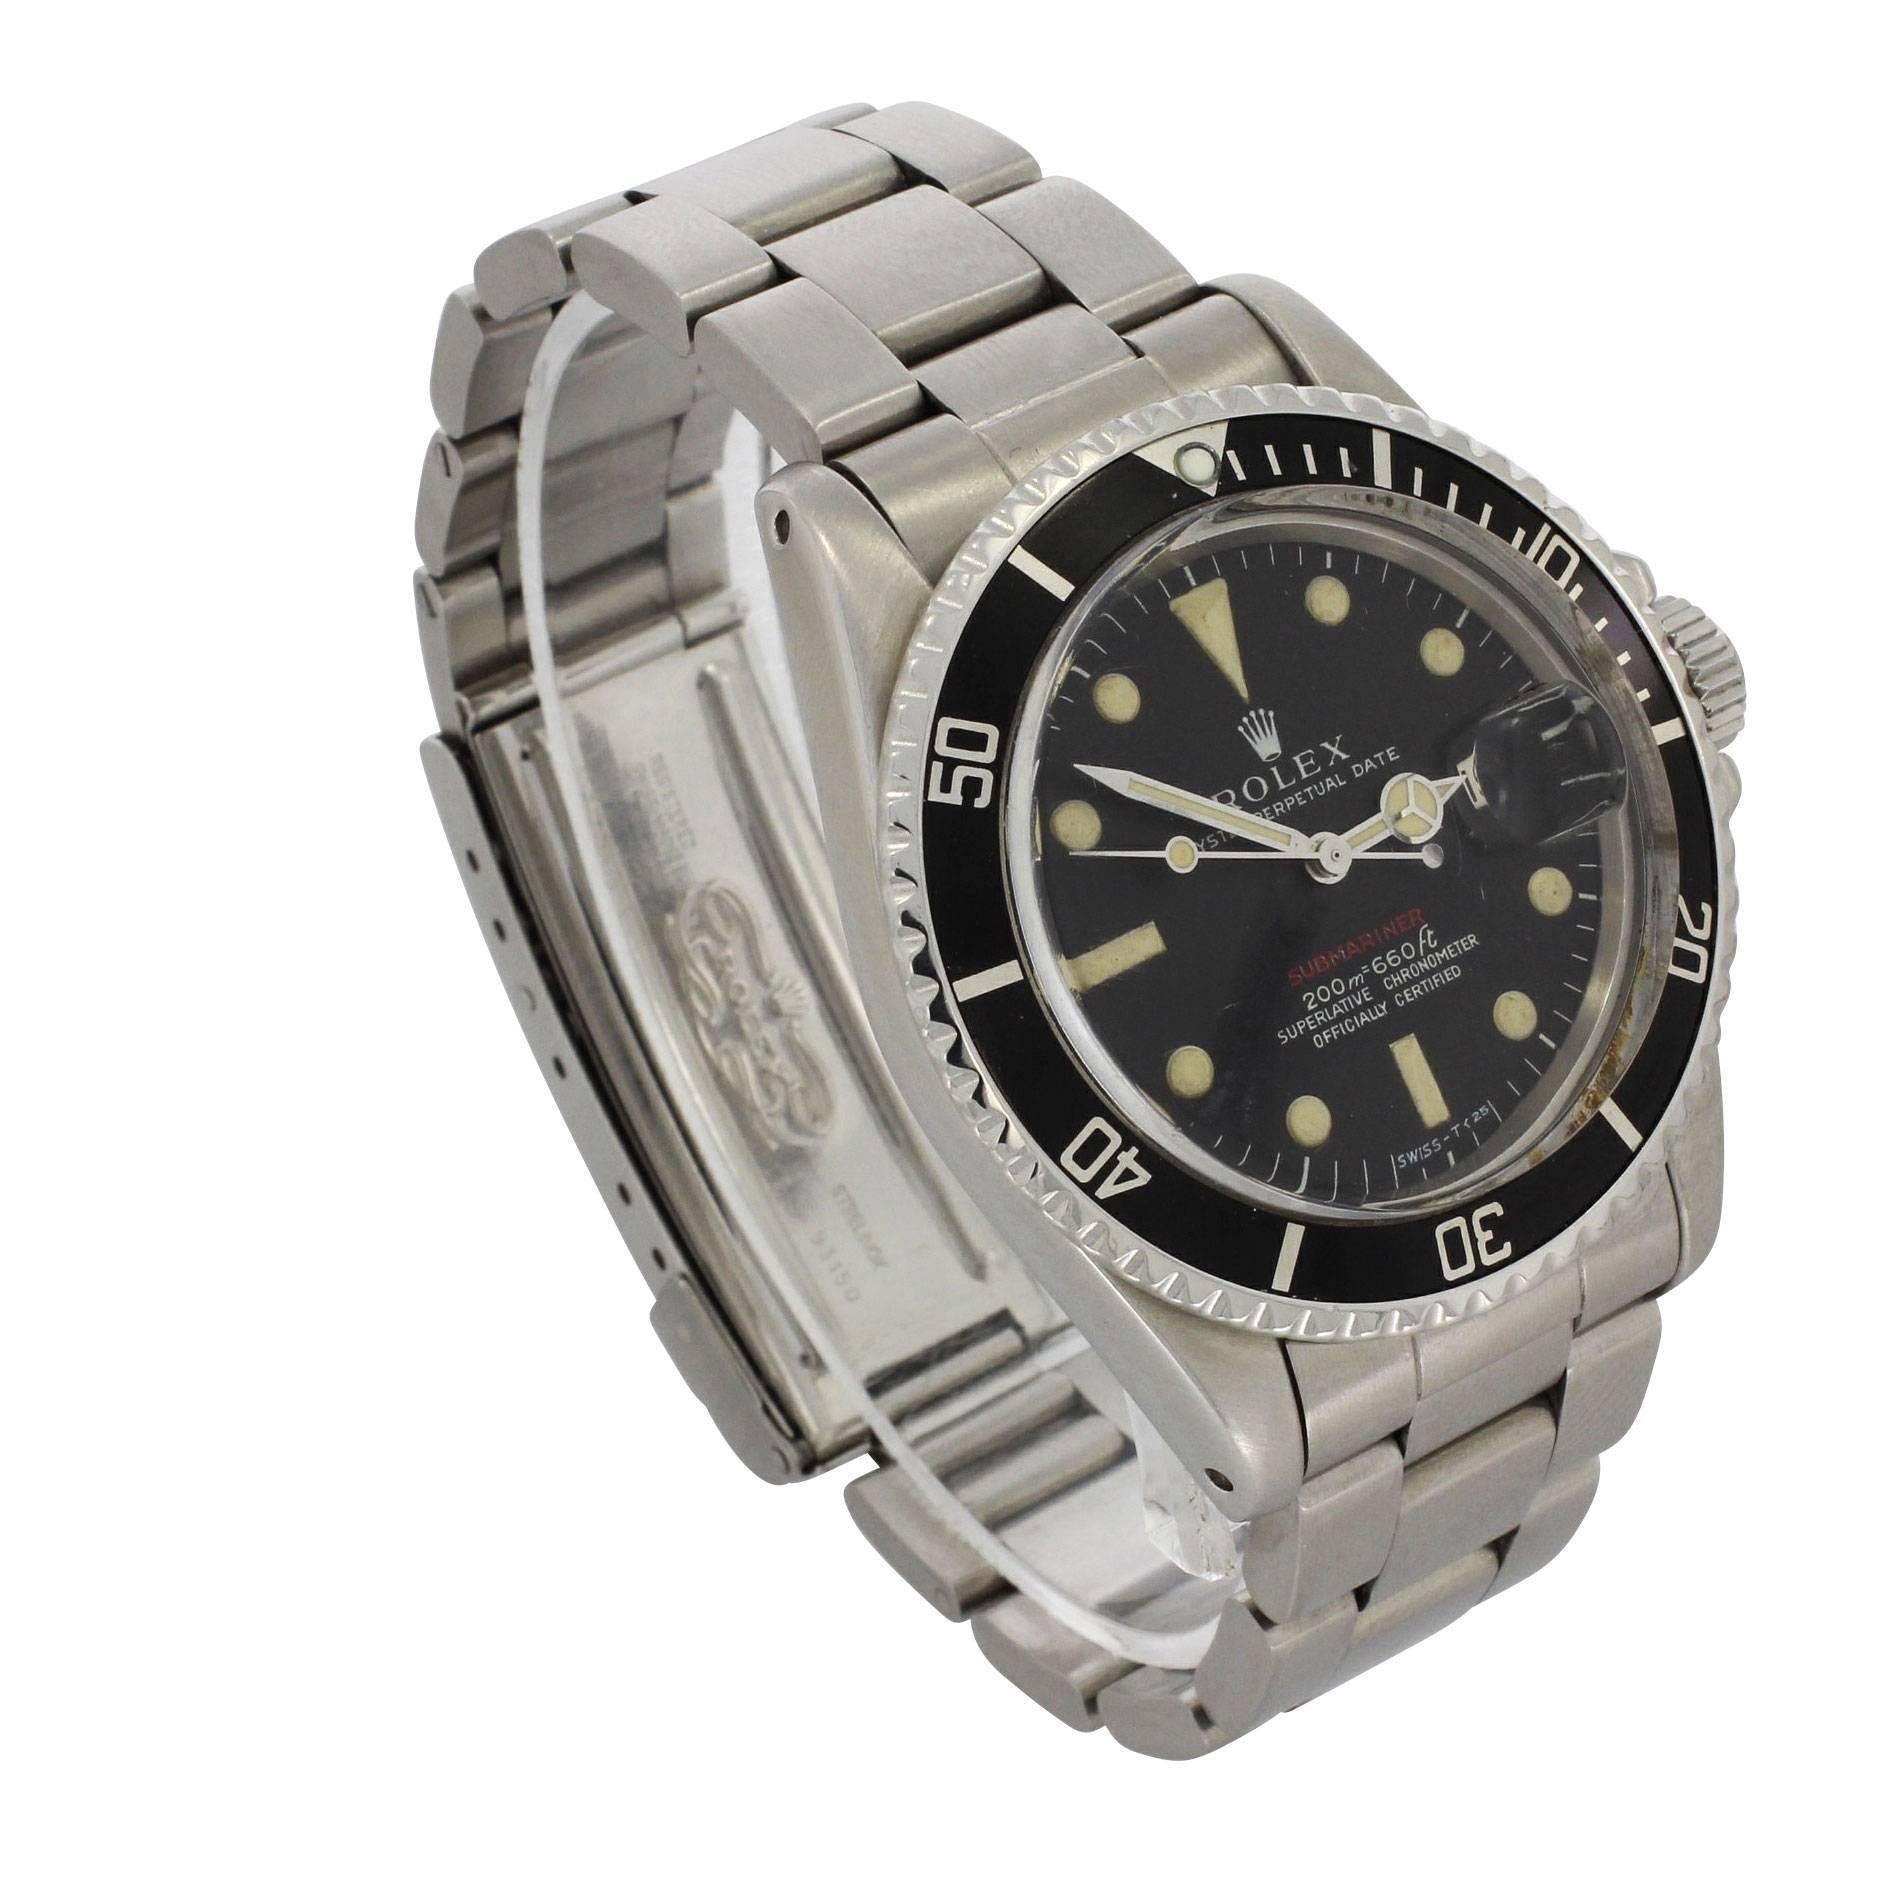 Rolex Stainless Steel Big Red 1680 Submariner Wristwatch, 1979 For Sale 1